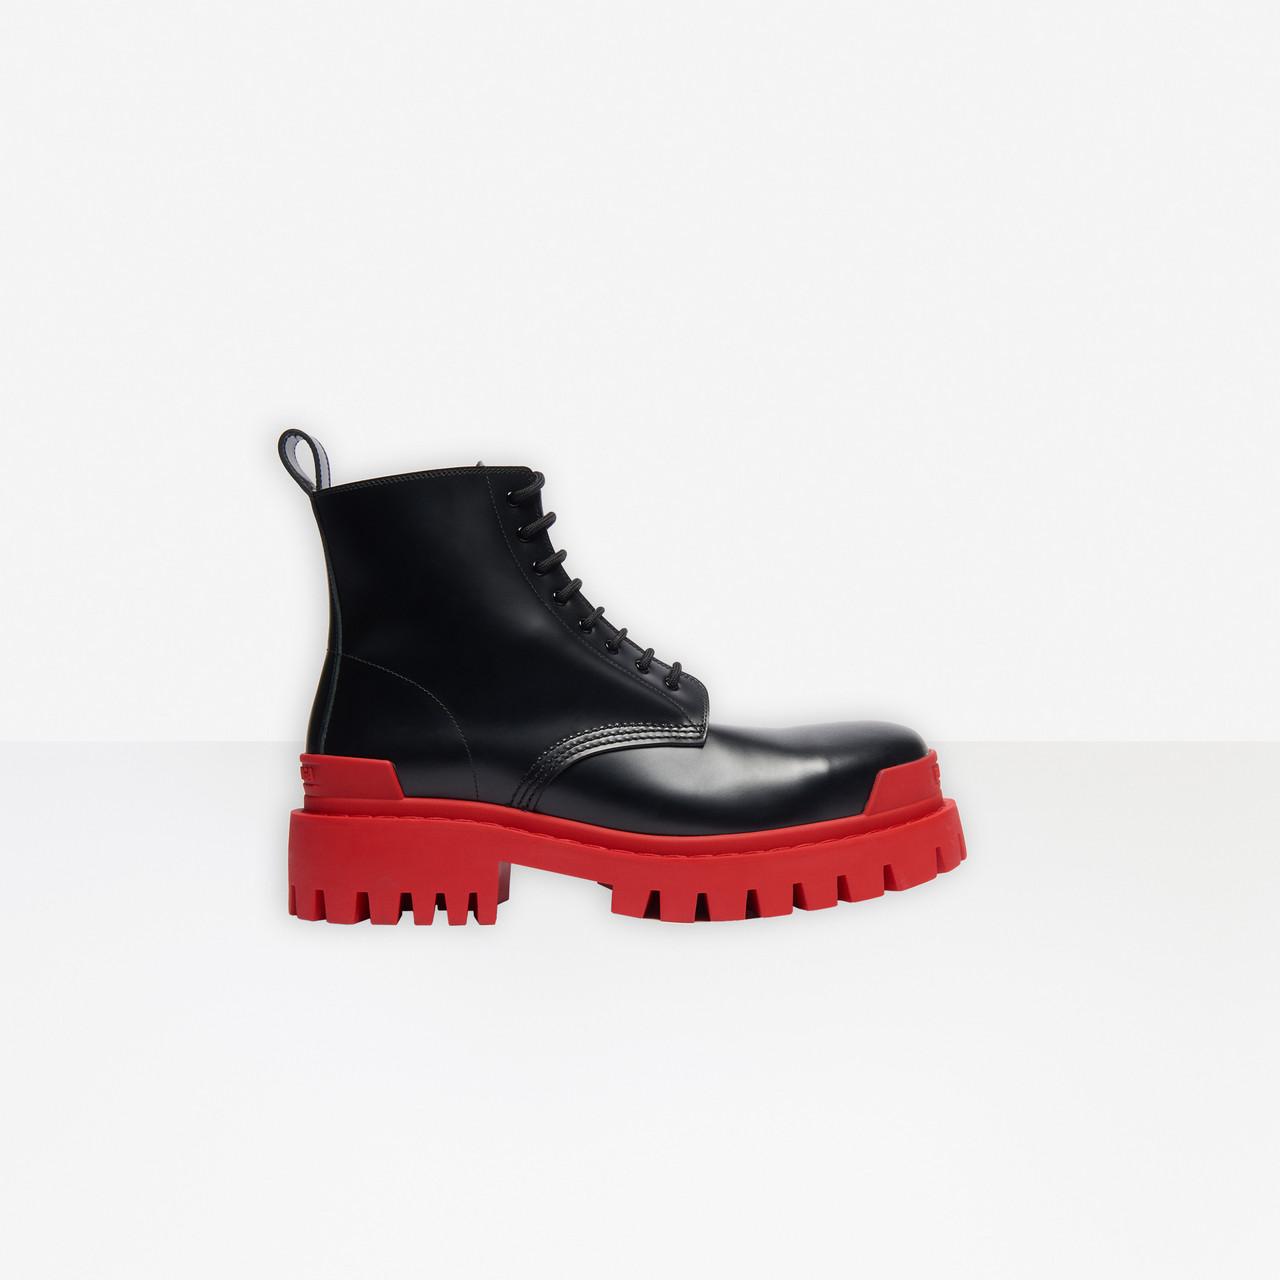 The internets obsessed with these big red boots